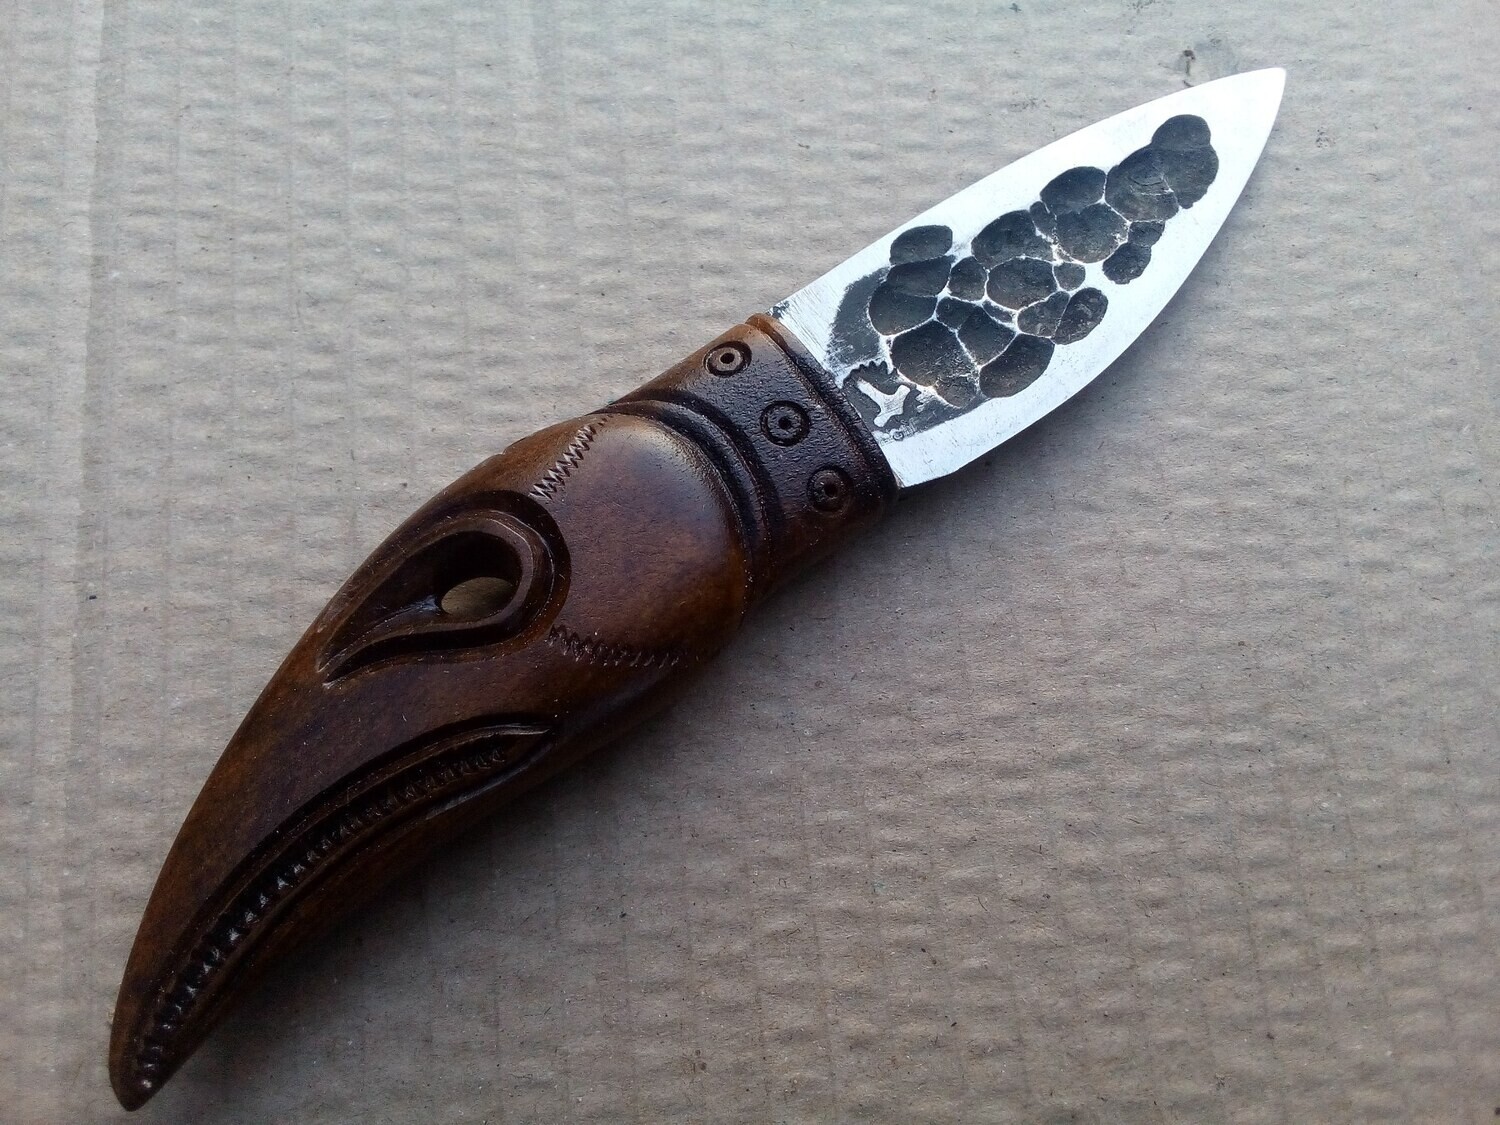 Small North / Yakut shape Knife with Raven Pattern, Boot Knife, Handforged, Antlers Carved Handle